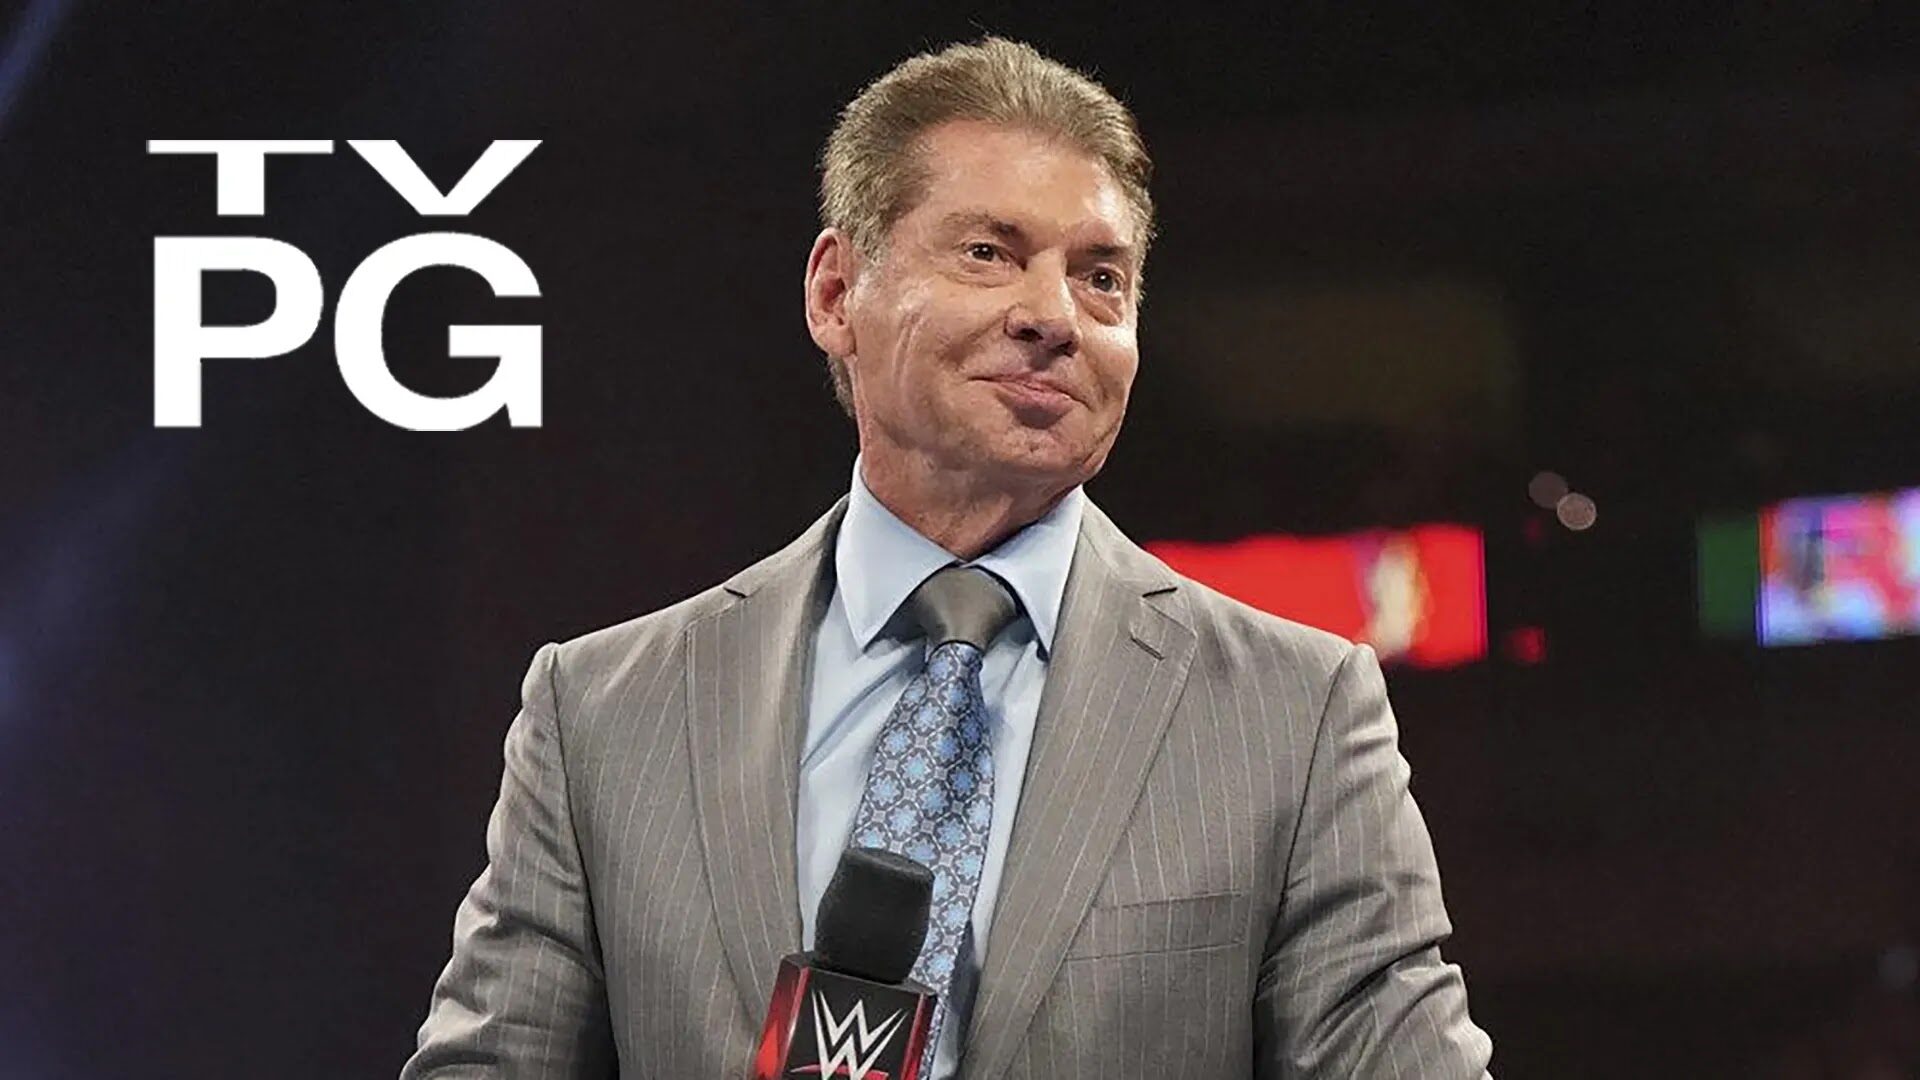 WWE Changes The Idea Of RAW Going Back To TV-14